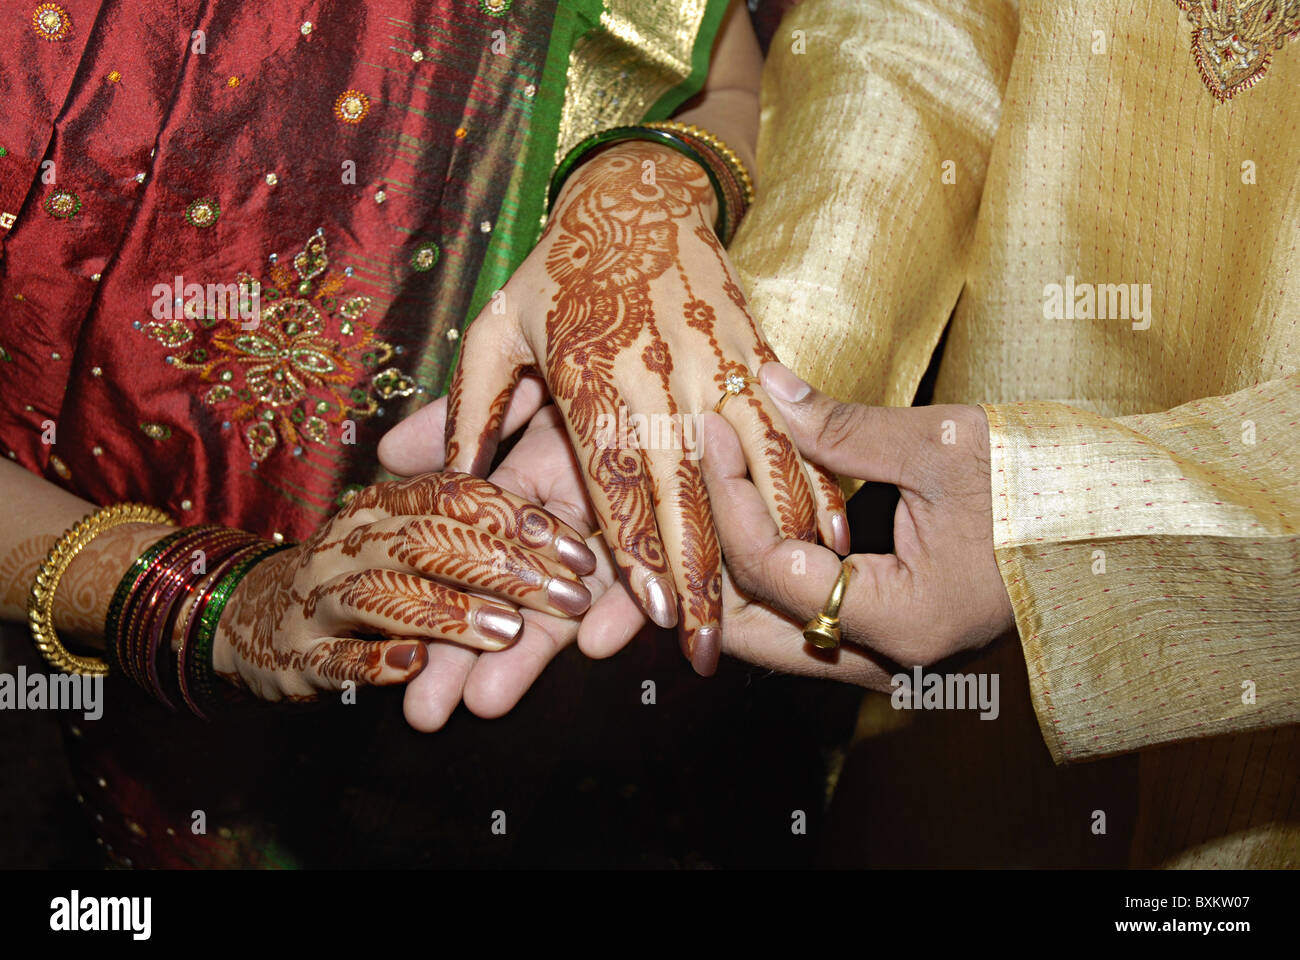 Image of Photo of the couple posing and holding each other's fingers and  showing rings during the typical Indian engagement ceremony.-ED092110-Picxy